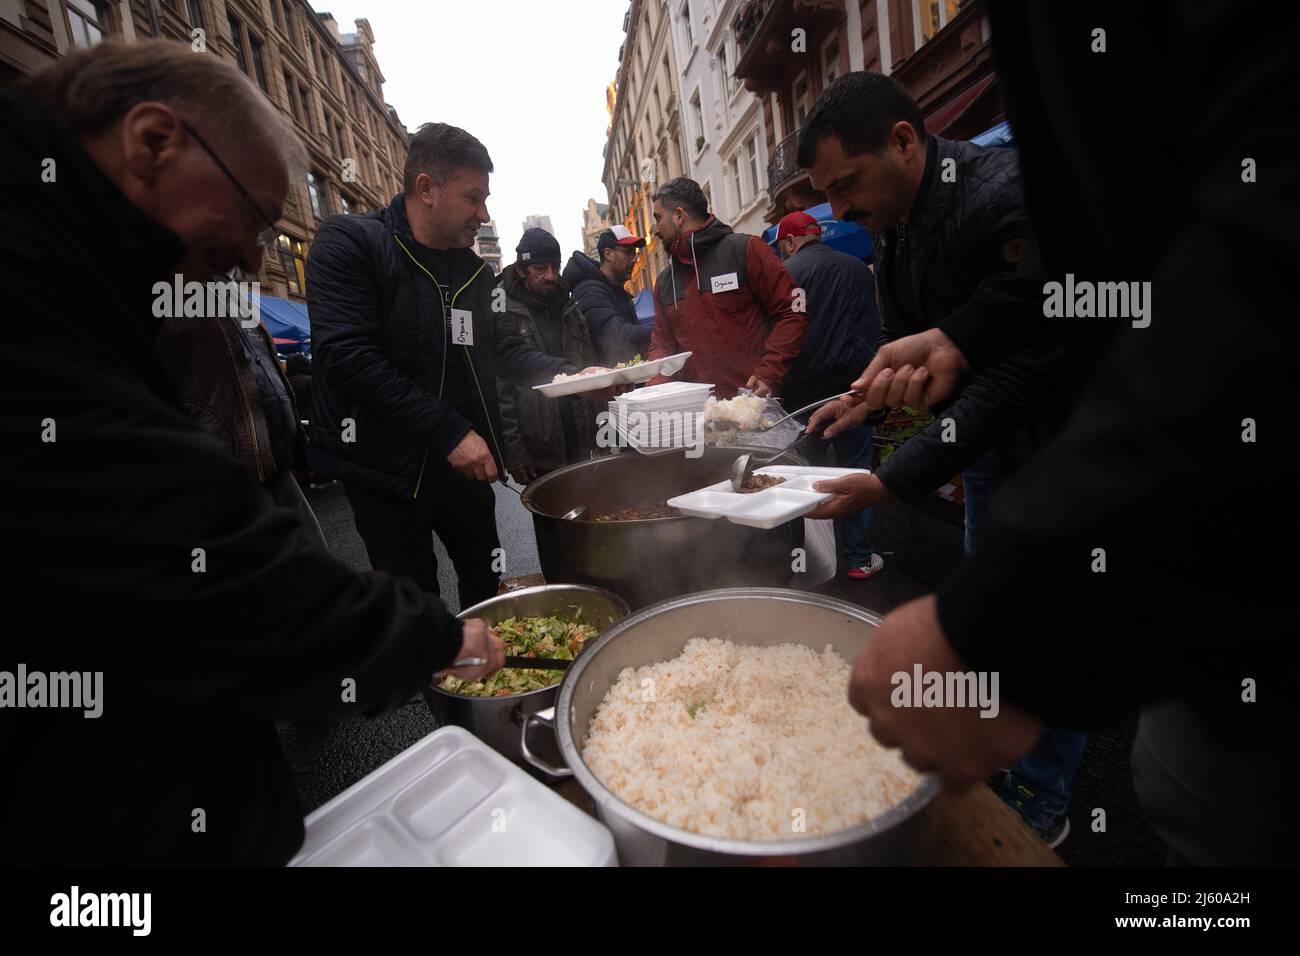 26 April 2022, Hessen, Frankfurt/Main: Employees hand out food in the Bahnhofsviertel during the 5th breaking of the fast organized by the 'Initiative gemeinsames Fastenbrechen'. In the section of Elbestraße between Münchenerstrasse and Kaiserstraße, local businesspeople and restaurants are inviting people to share a meal. The Islamic fasting month of Ramadan continues until the evening of May 1, 2022. Photo: Sebastian Gollnow/dpa Stock Photo